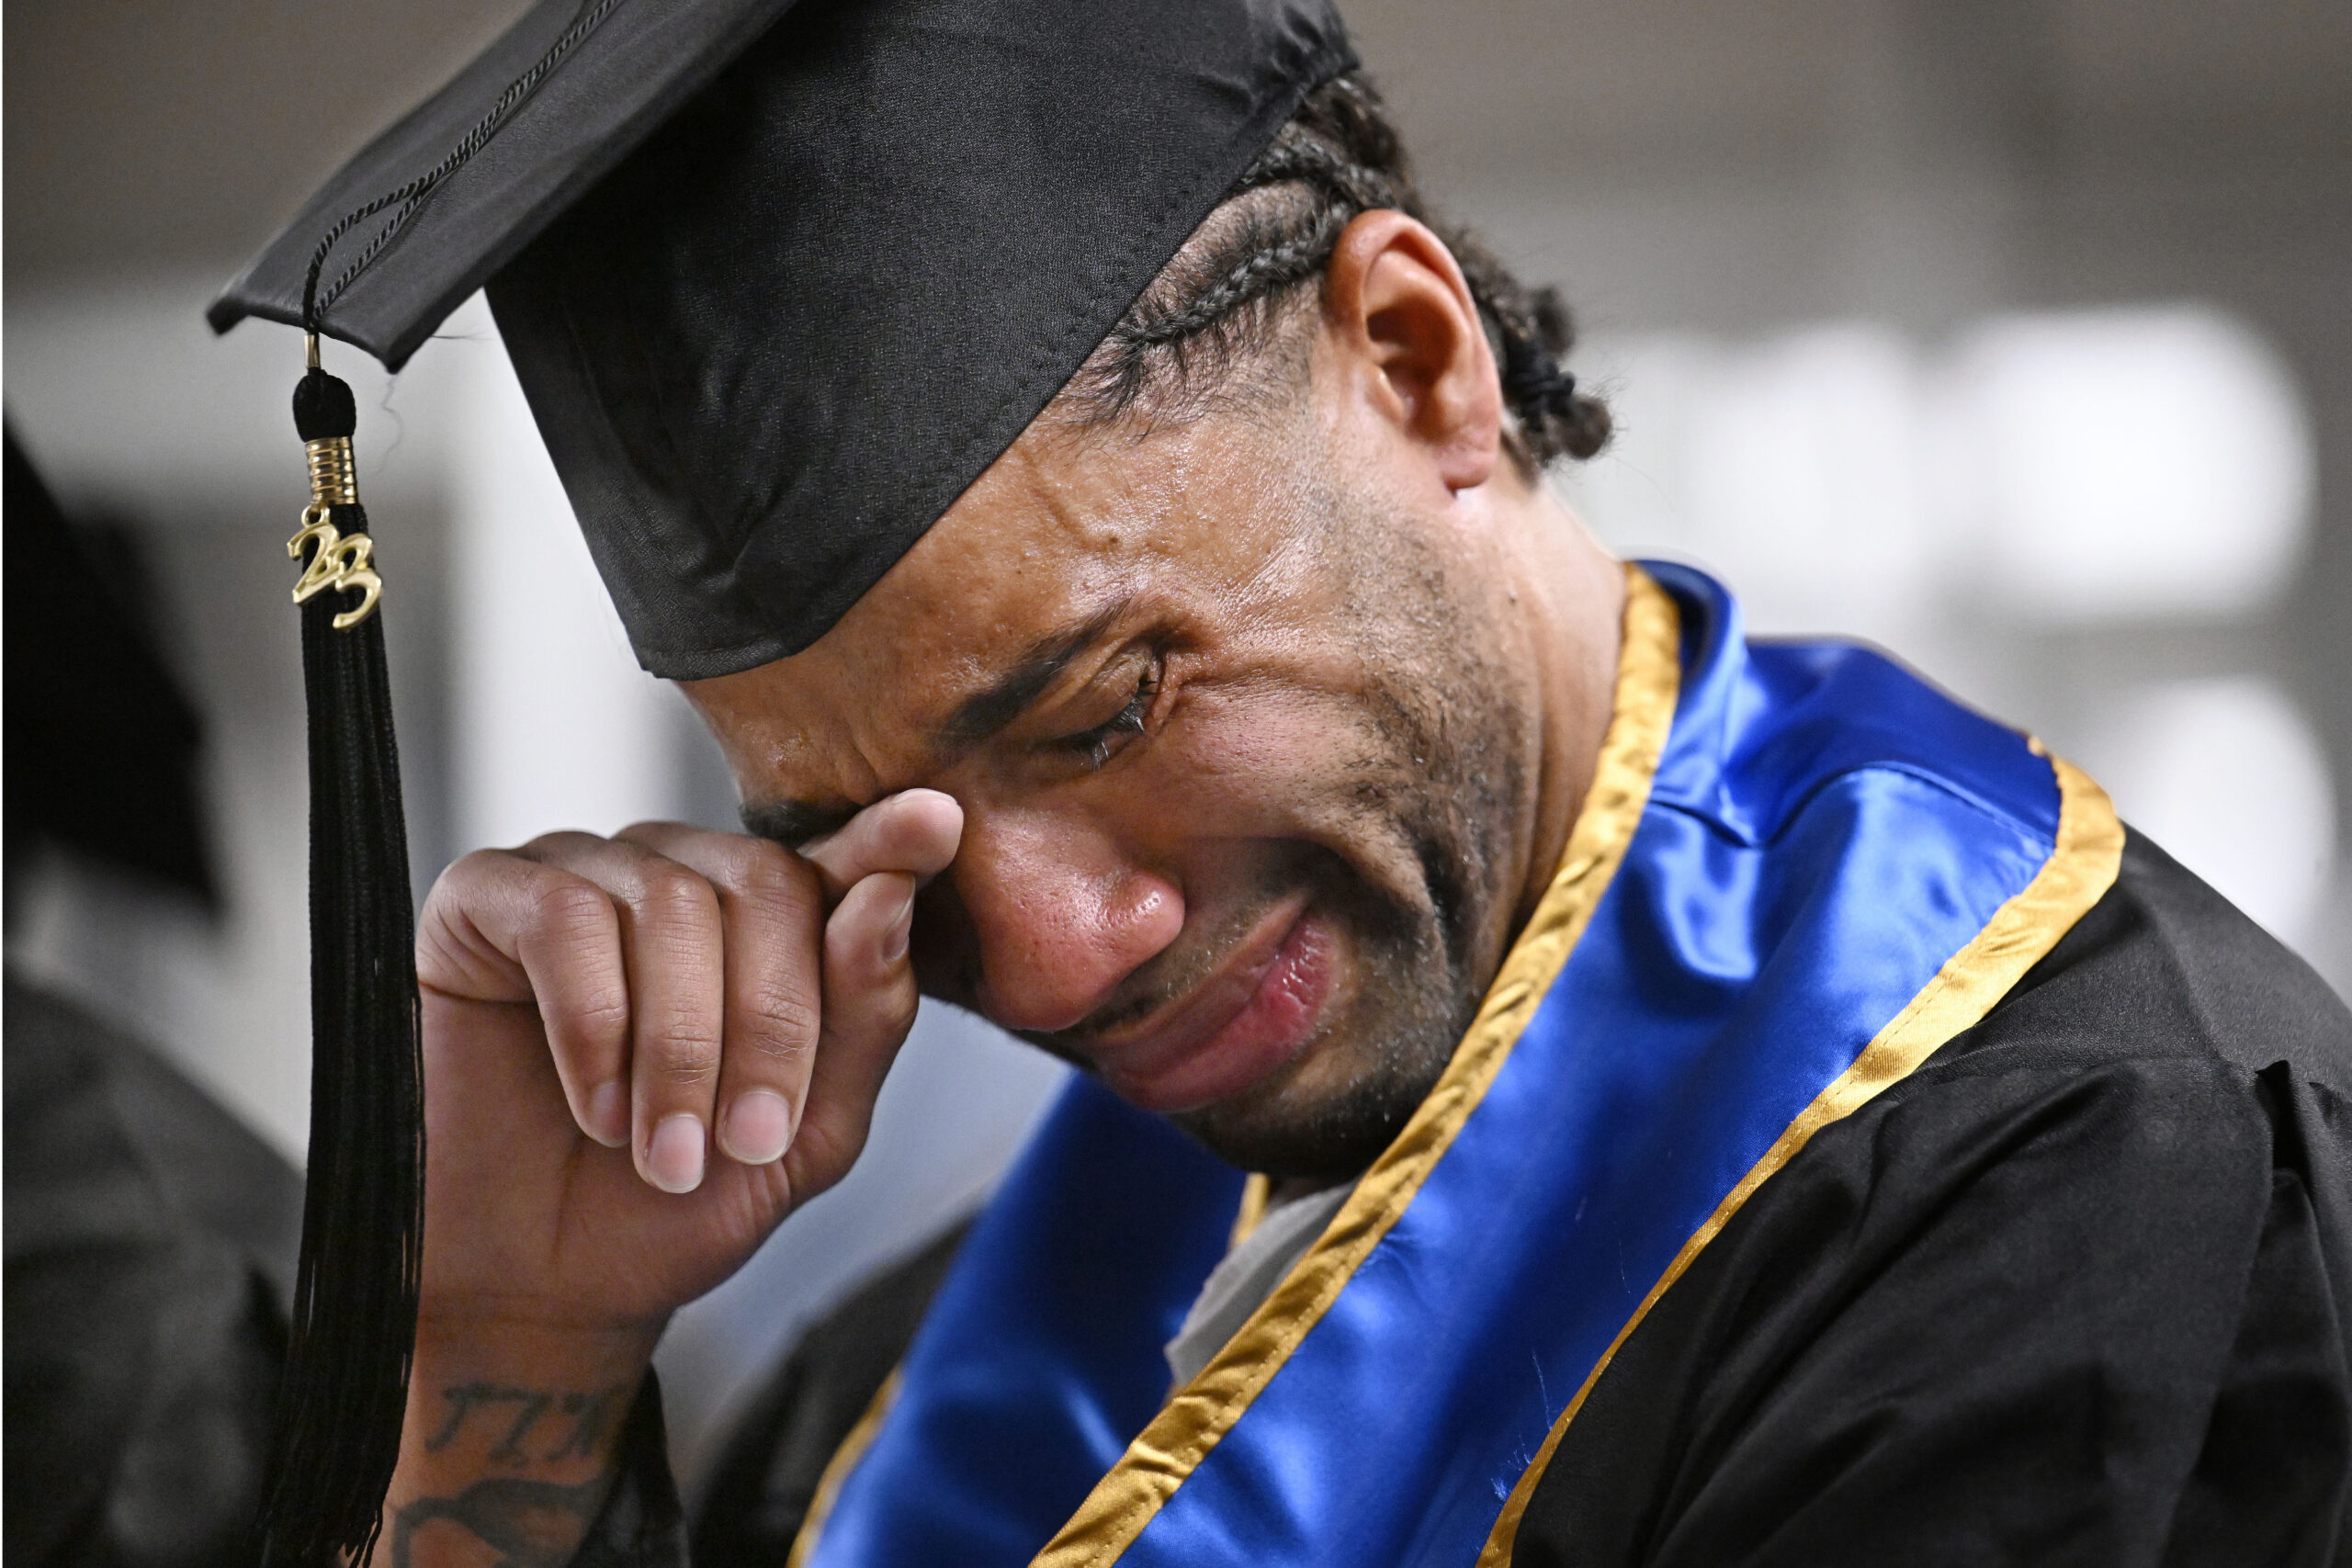 Future graduate Evan Holmes wipes his eyes after delivering a speech at the first-ever college graduation ceremony at MacDougall-Walker Correctional Institution, Friday, June 9, 2023, in Suffield, Conn. The ceremony was held under a partnership established in 2021 by the University of New Haven and the Yale Prison Education Initiative. Photo credit: Jessica Hill, The Associated Press